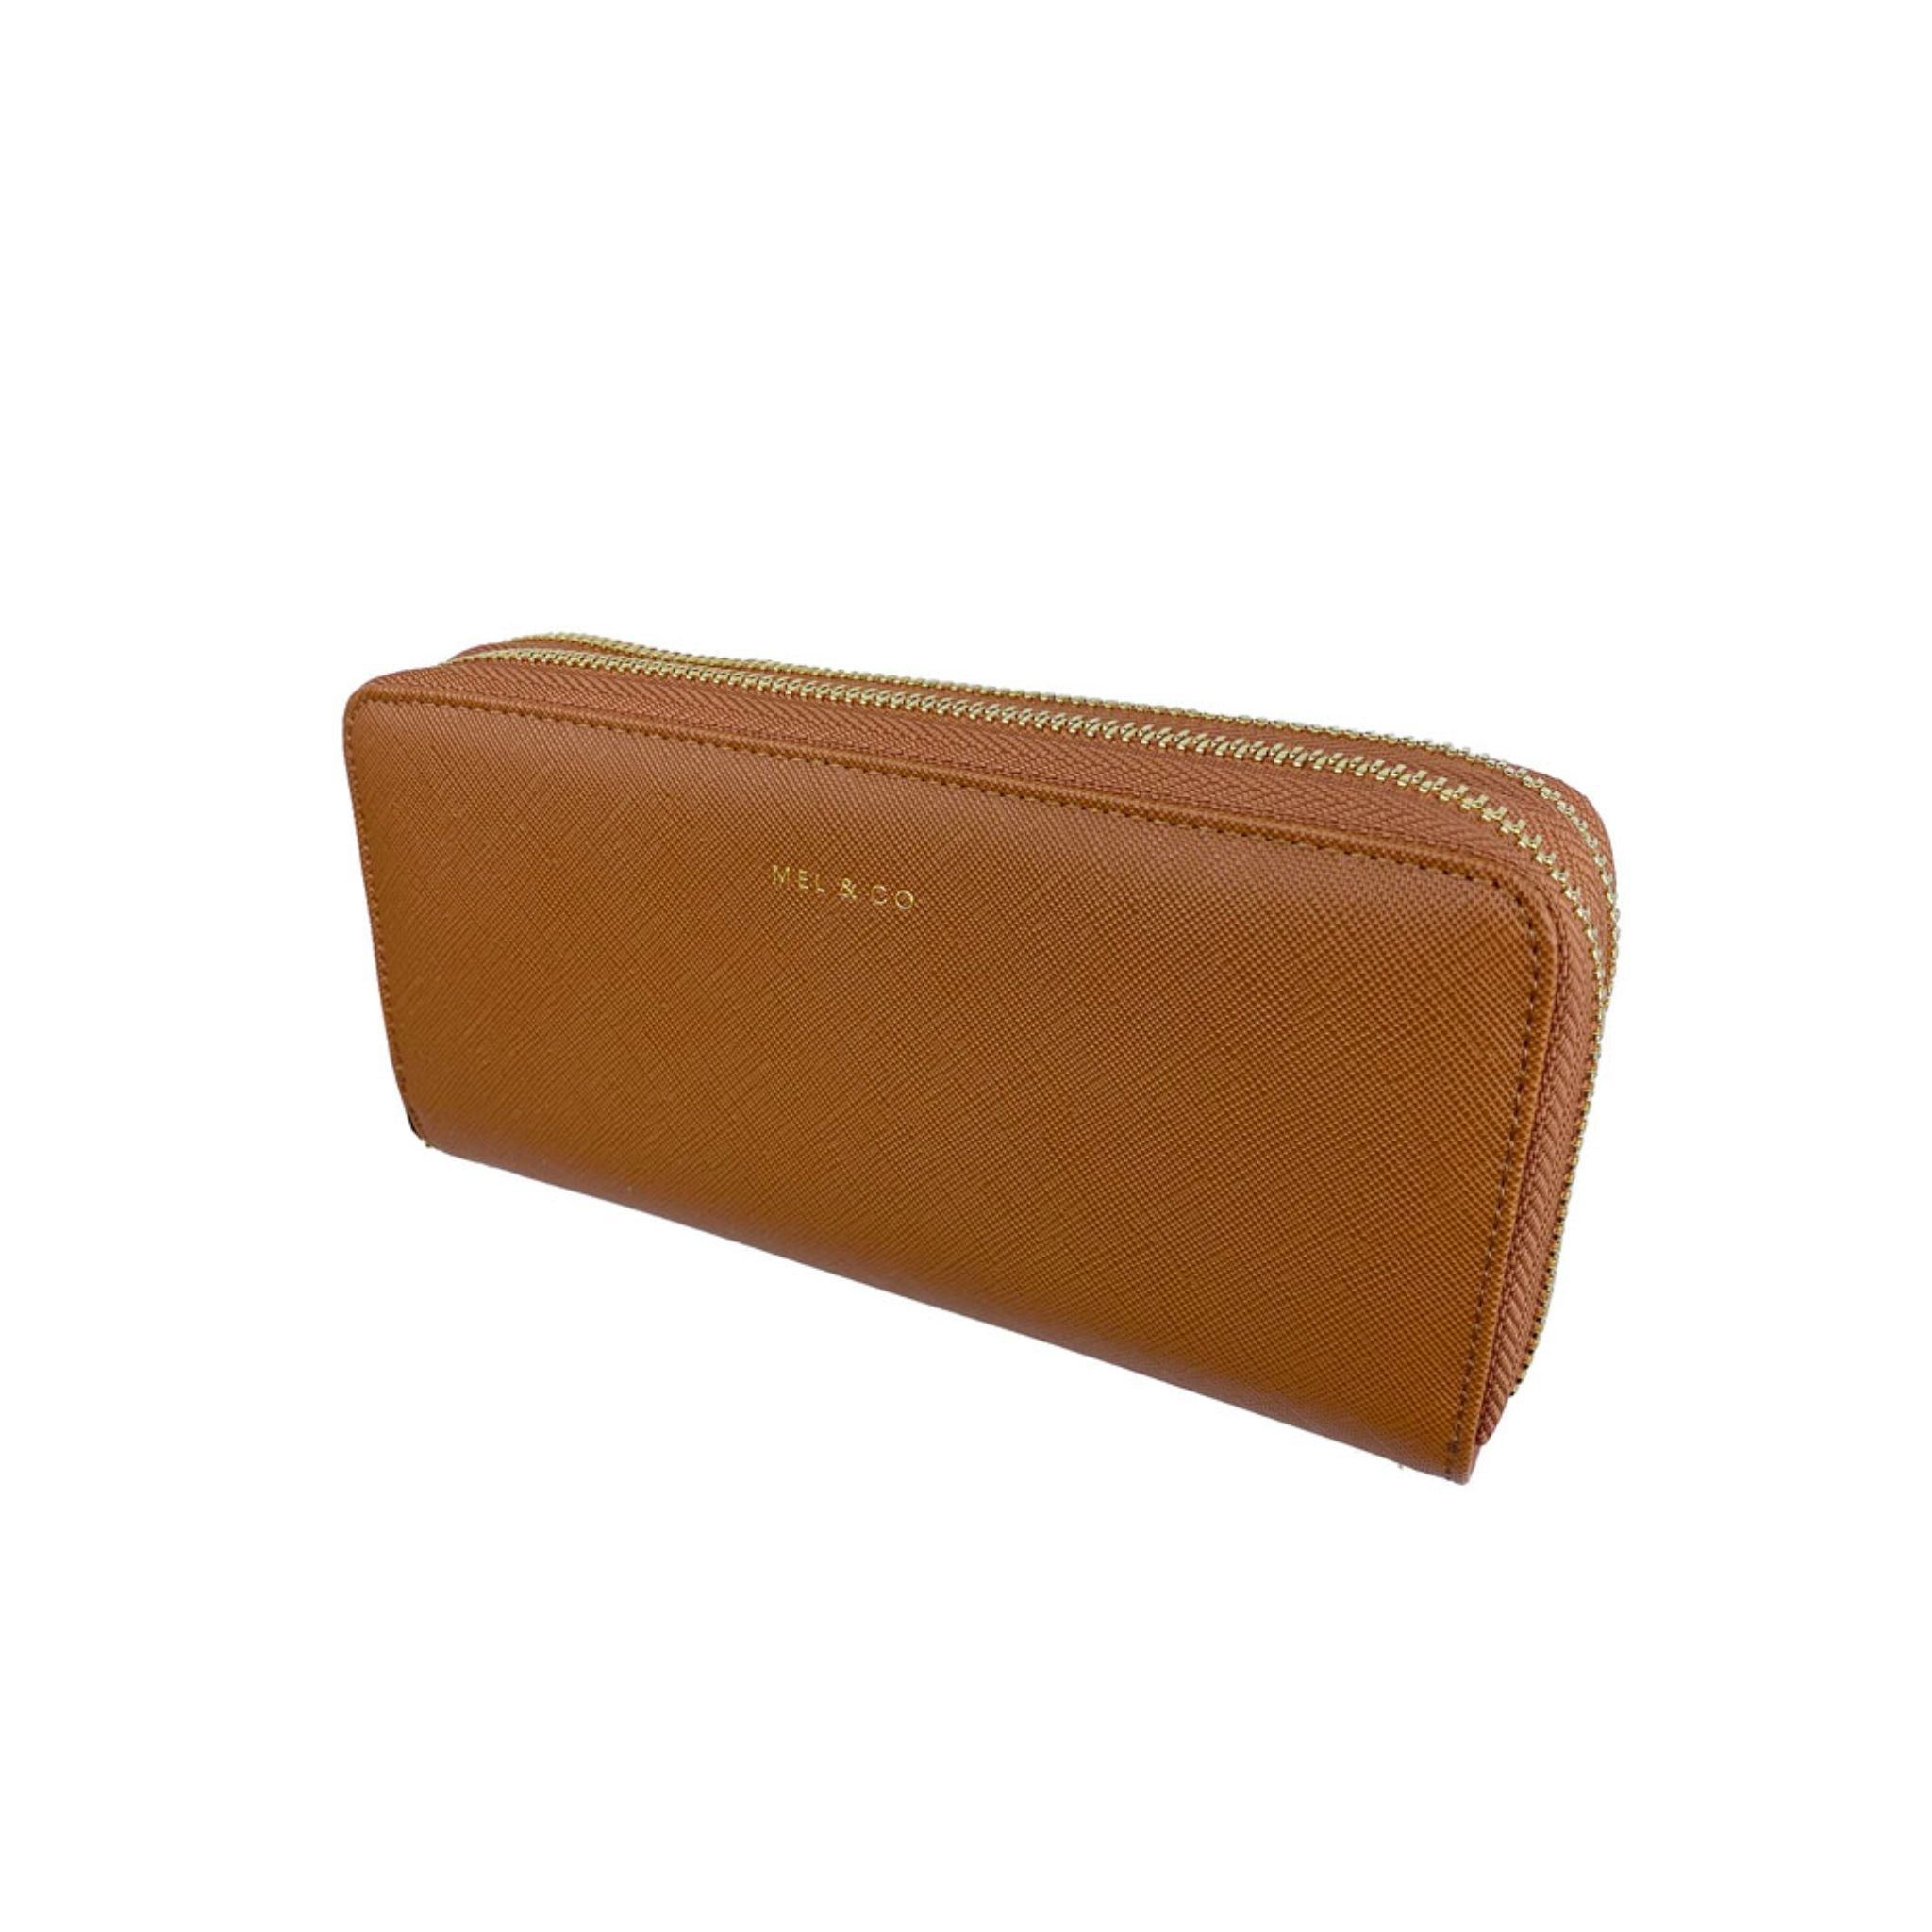 Mel&Co Saffiano-Effect Double Zip-Around Large Wallet With Wrist Strap Tan